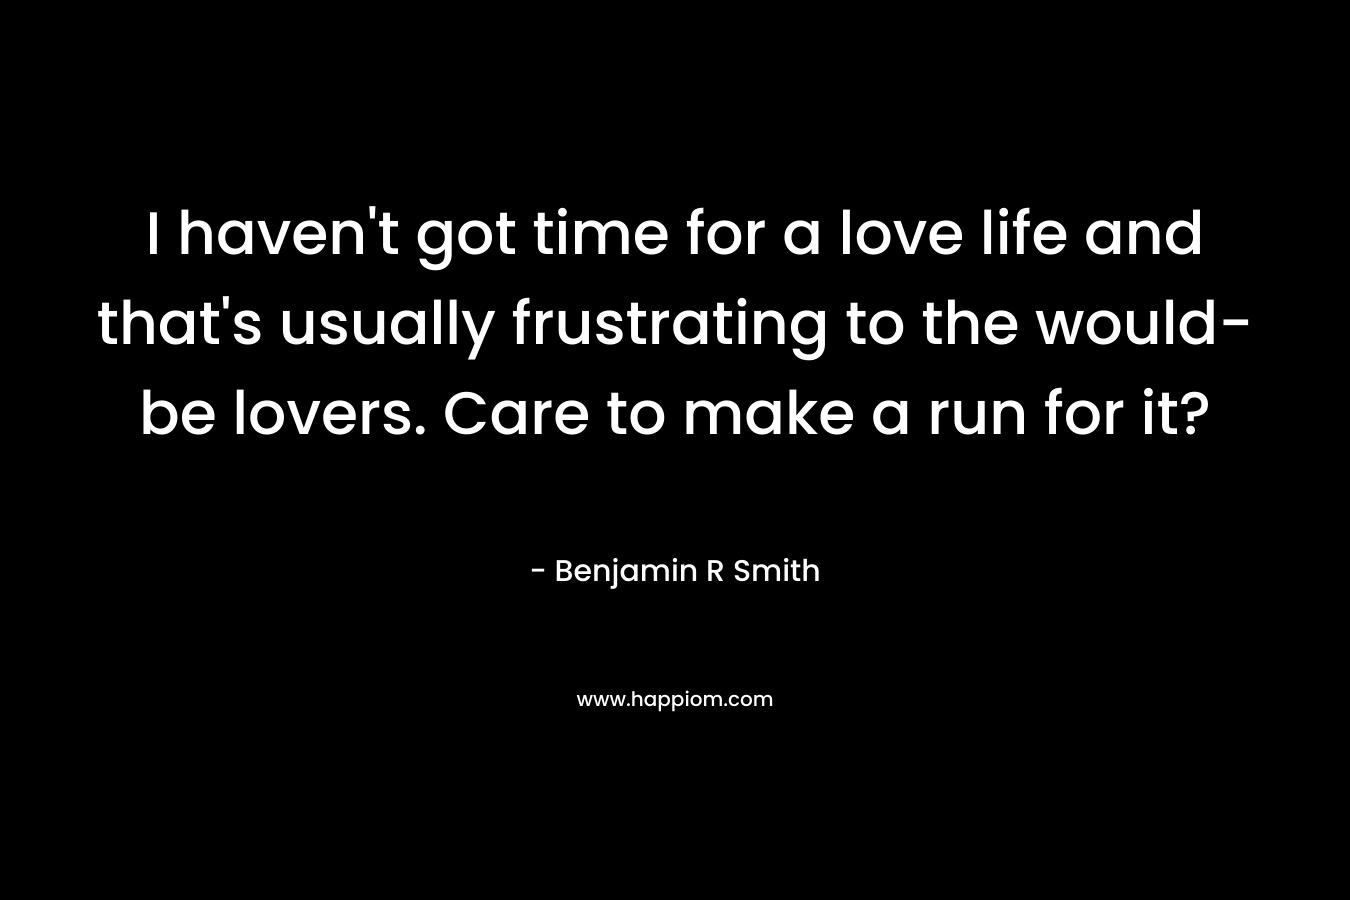 I haven't got time for a love life and that's usually frustrating to the would-be lovers. Care to make a run for it?